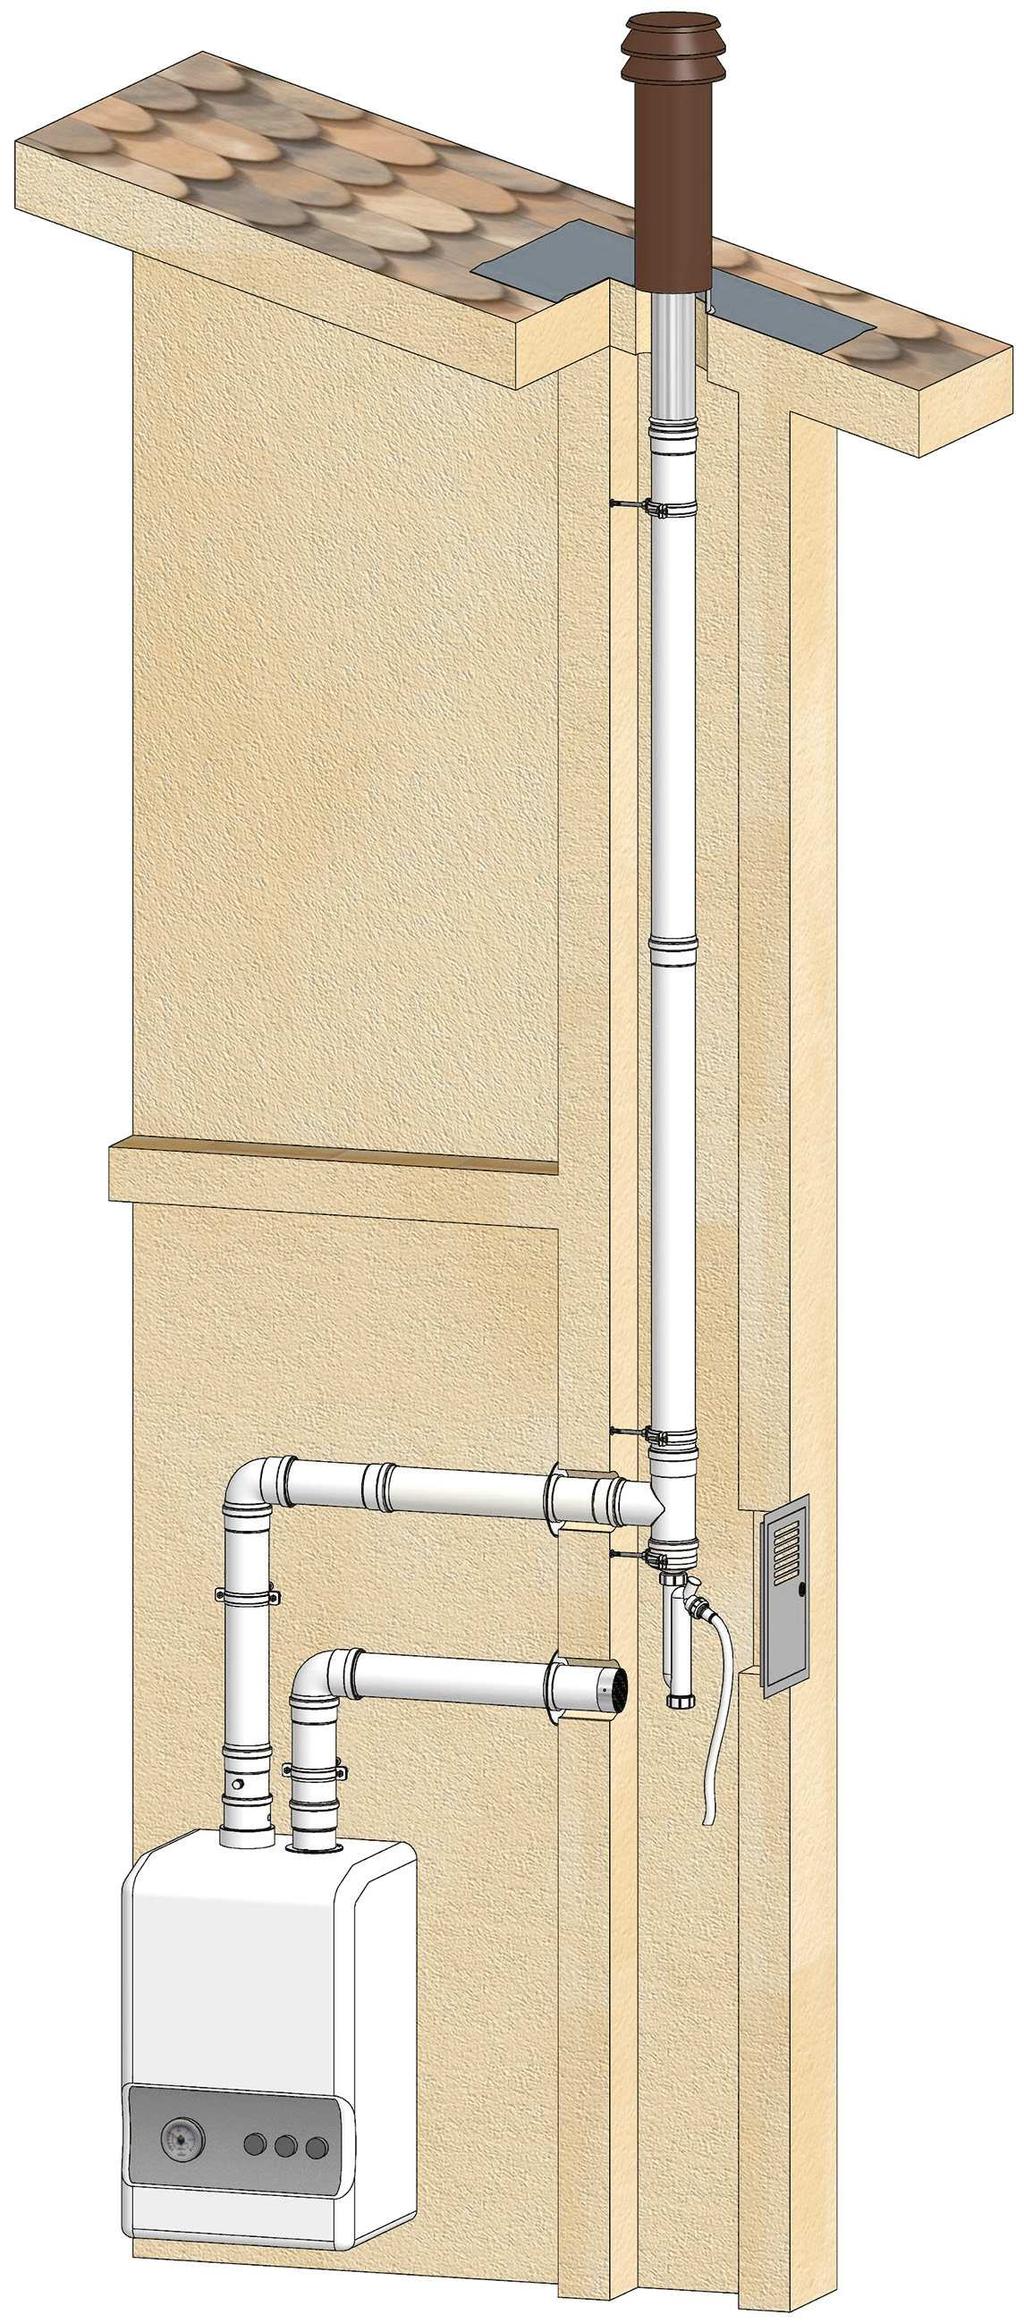 Example of C-Type gas appliance with STABILE AL split wall ducts for the inlet of combustion air and the discharge of the combustion products.